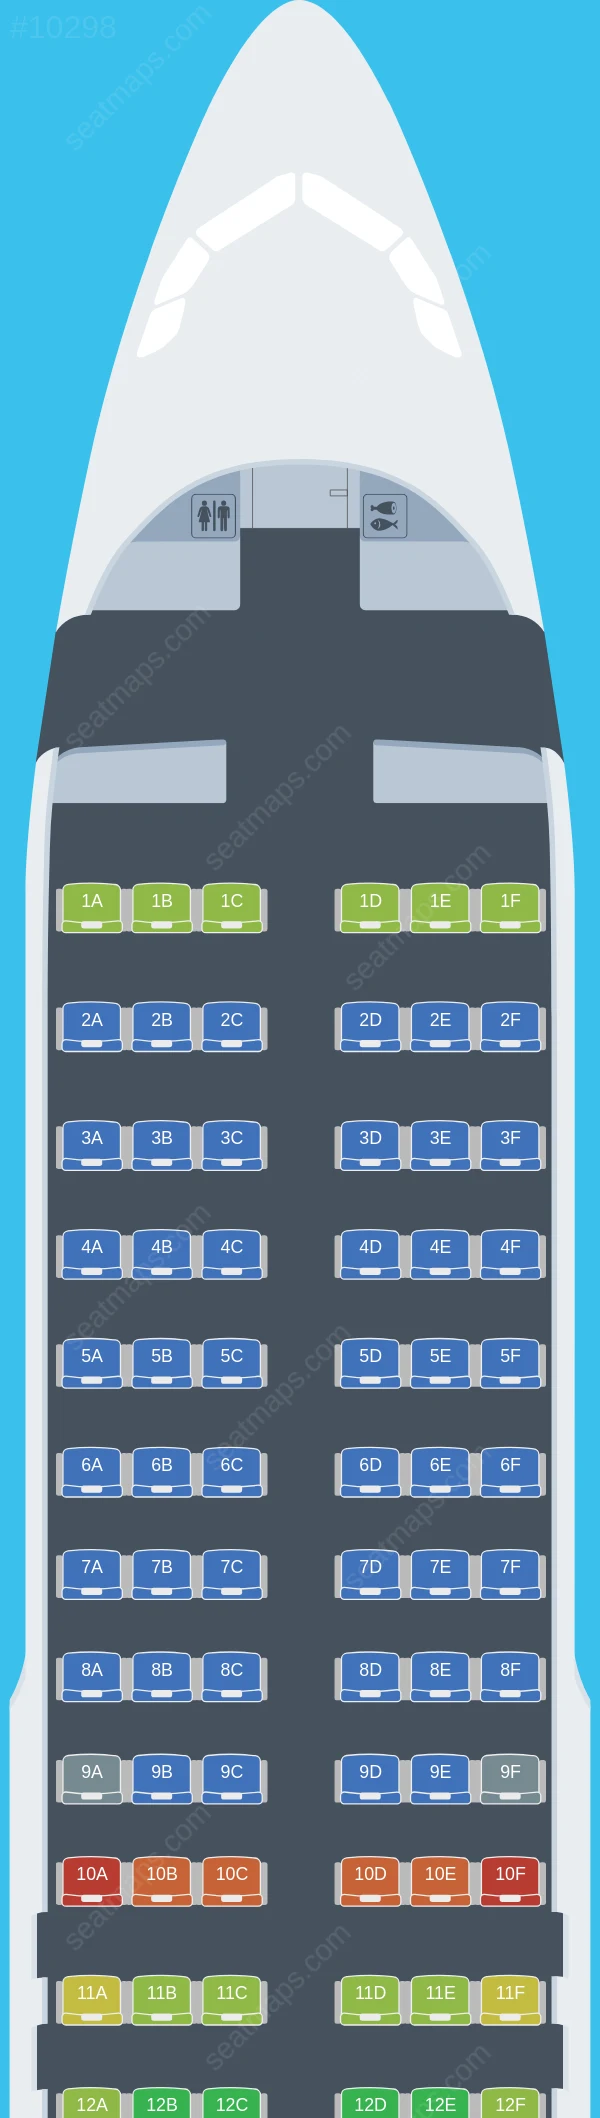 LATAM Airlines Peru Airbus A320-200 seatmap preview